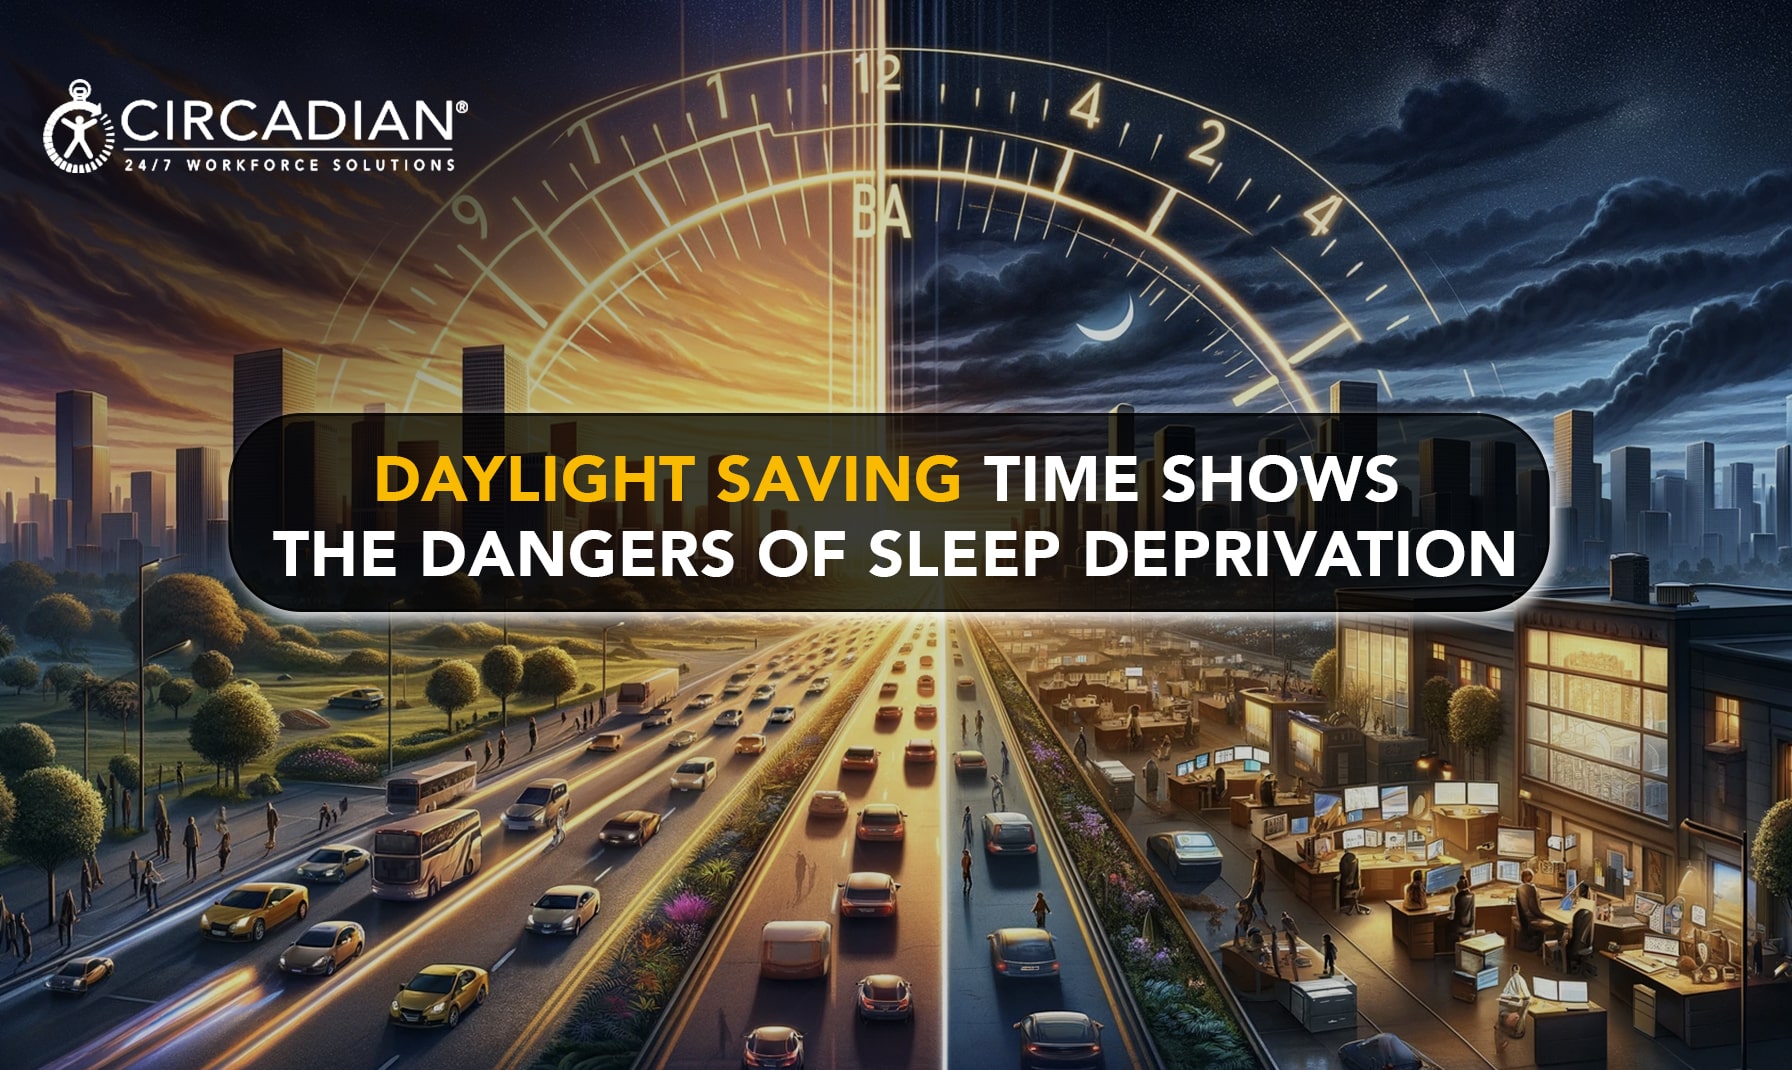 Daylight Saving Time Shows The Dangers of Sleep Deprivation